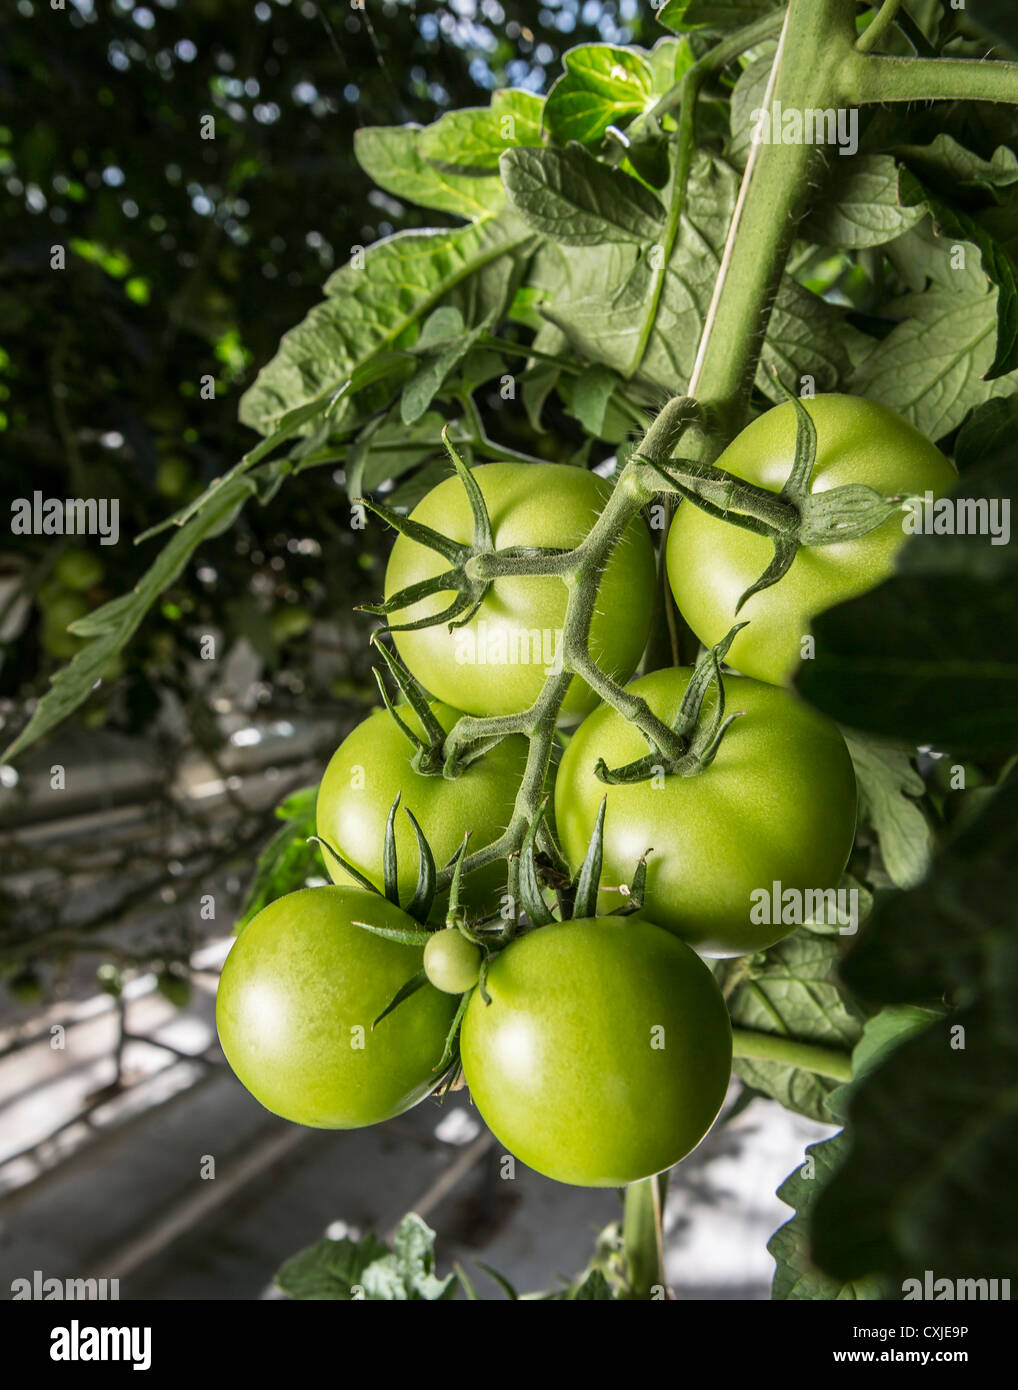 Tomatoes in greenhouse, Iceland.  Greenhouses are heated with geothermal energy keeping the cost of energy affordable and clean. Stock Photo